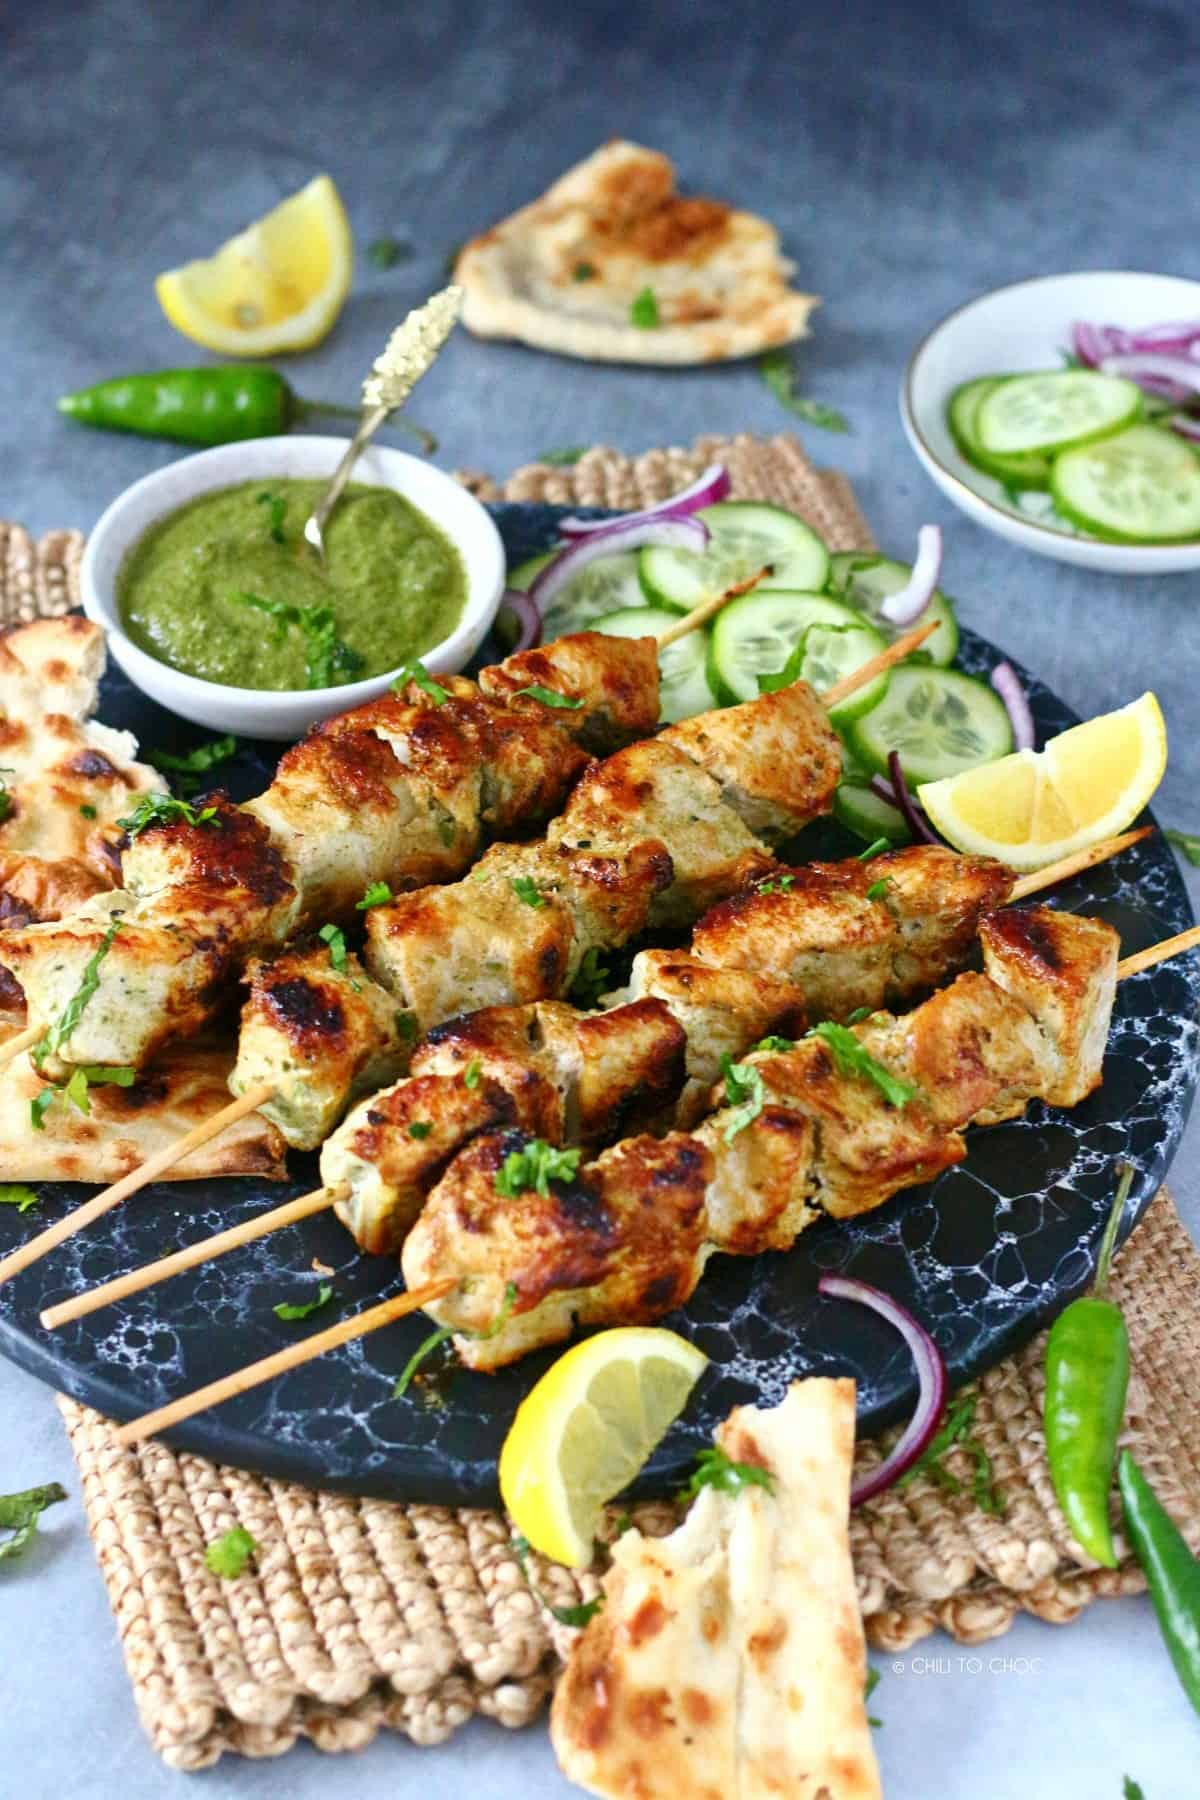 Chicken Malai Boti skewers on a marble dish surrounded by sliced red onion, green chilies, lemon wedges, sliced cucumber and a green chutney.